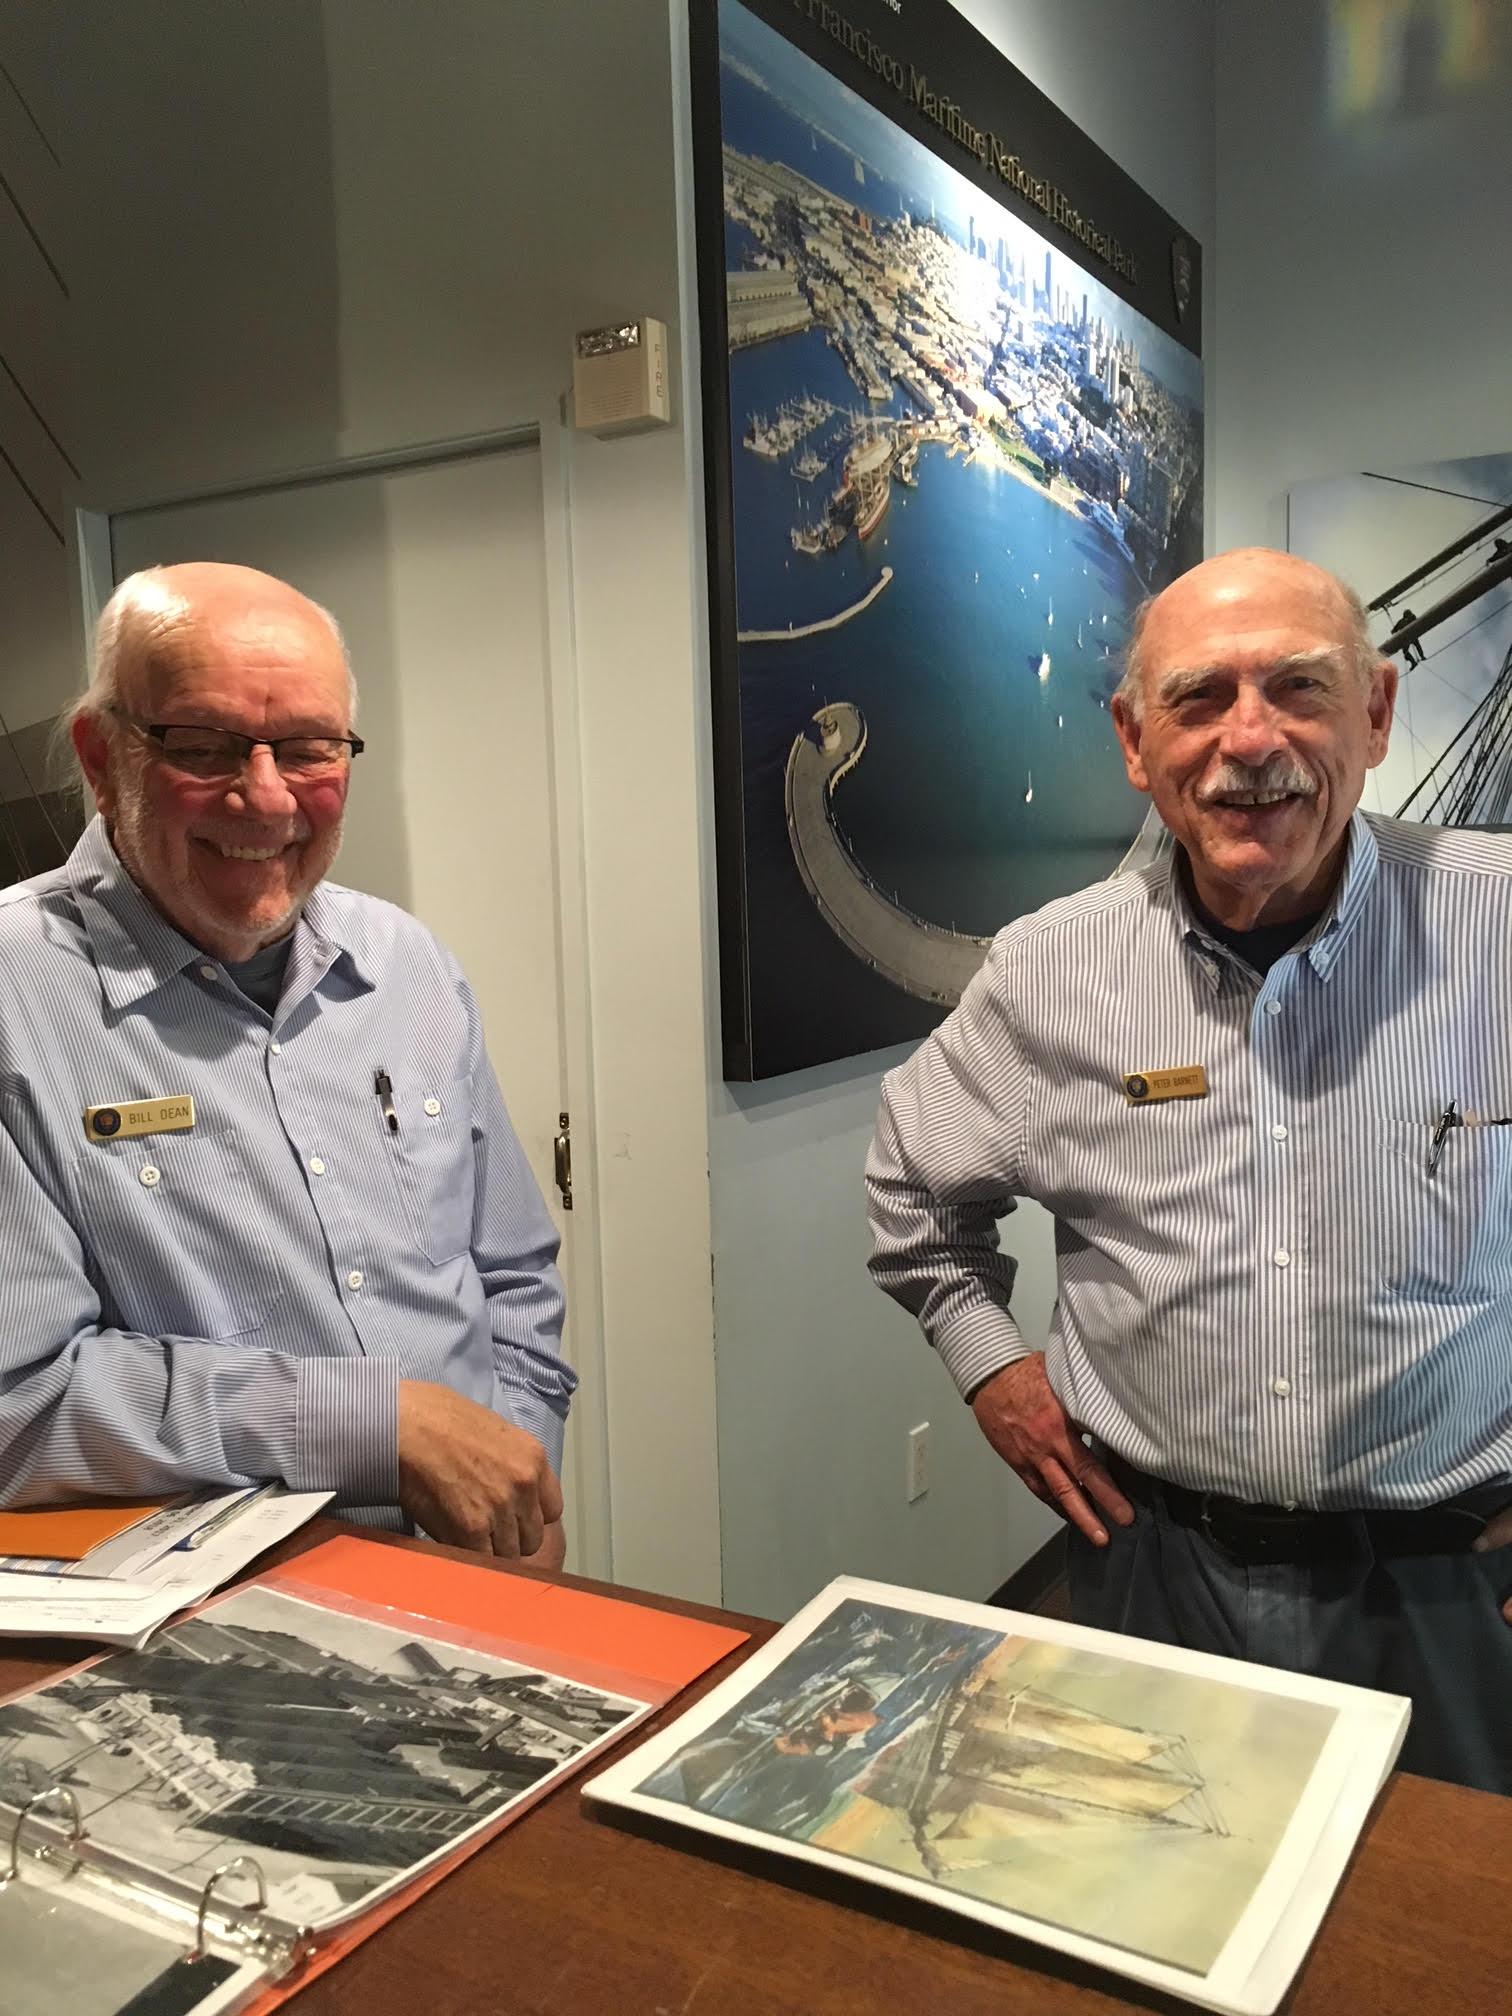 Docents Bill (left) and Pete (right) are pictured in the Visitor Center.